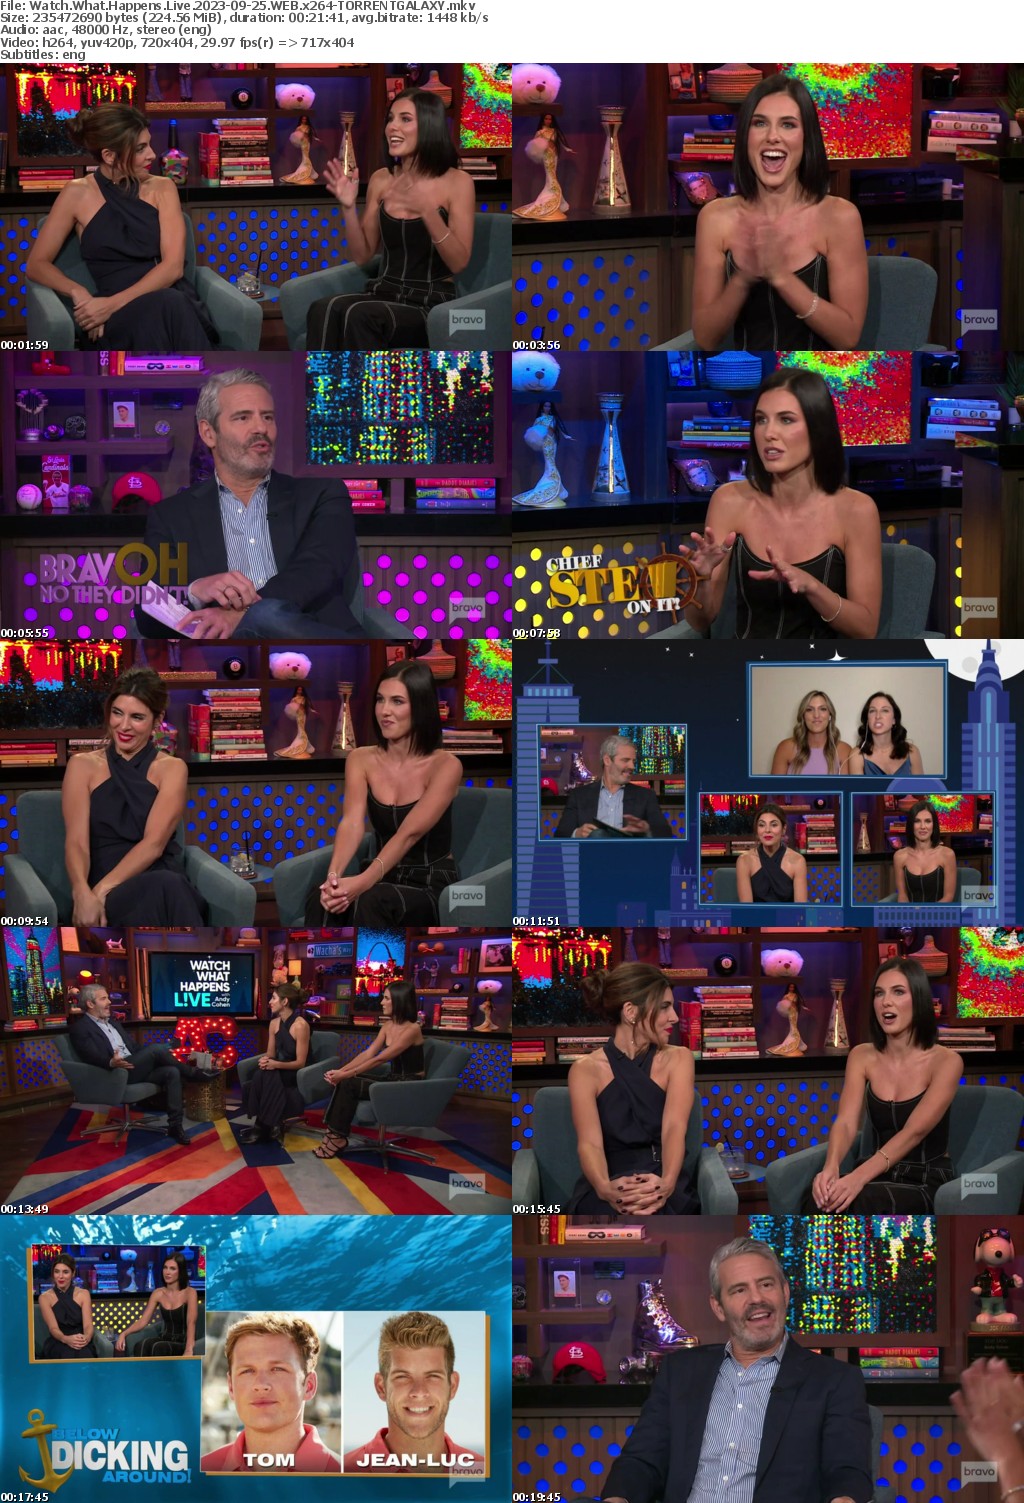 Watch What Happens Live 2023-09-25 WEB x264-GALAXY